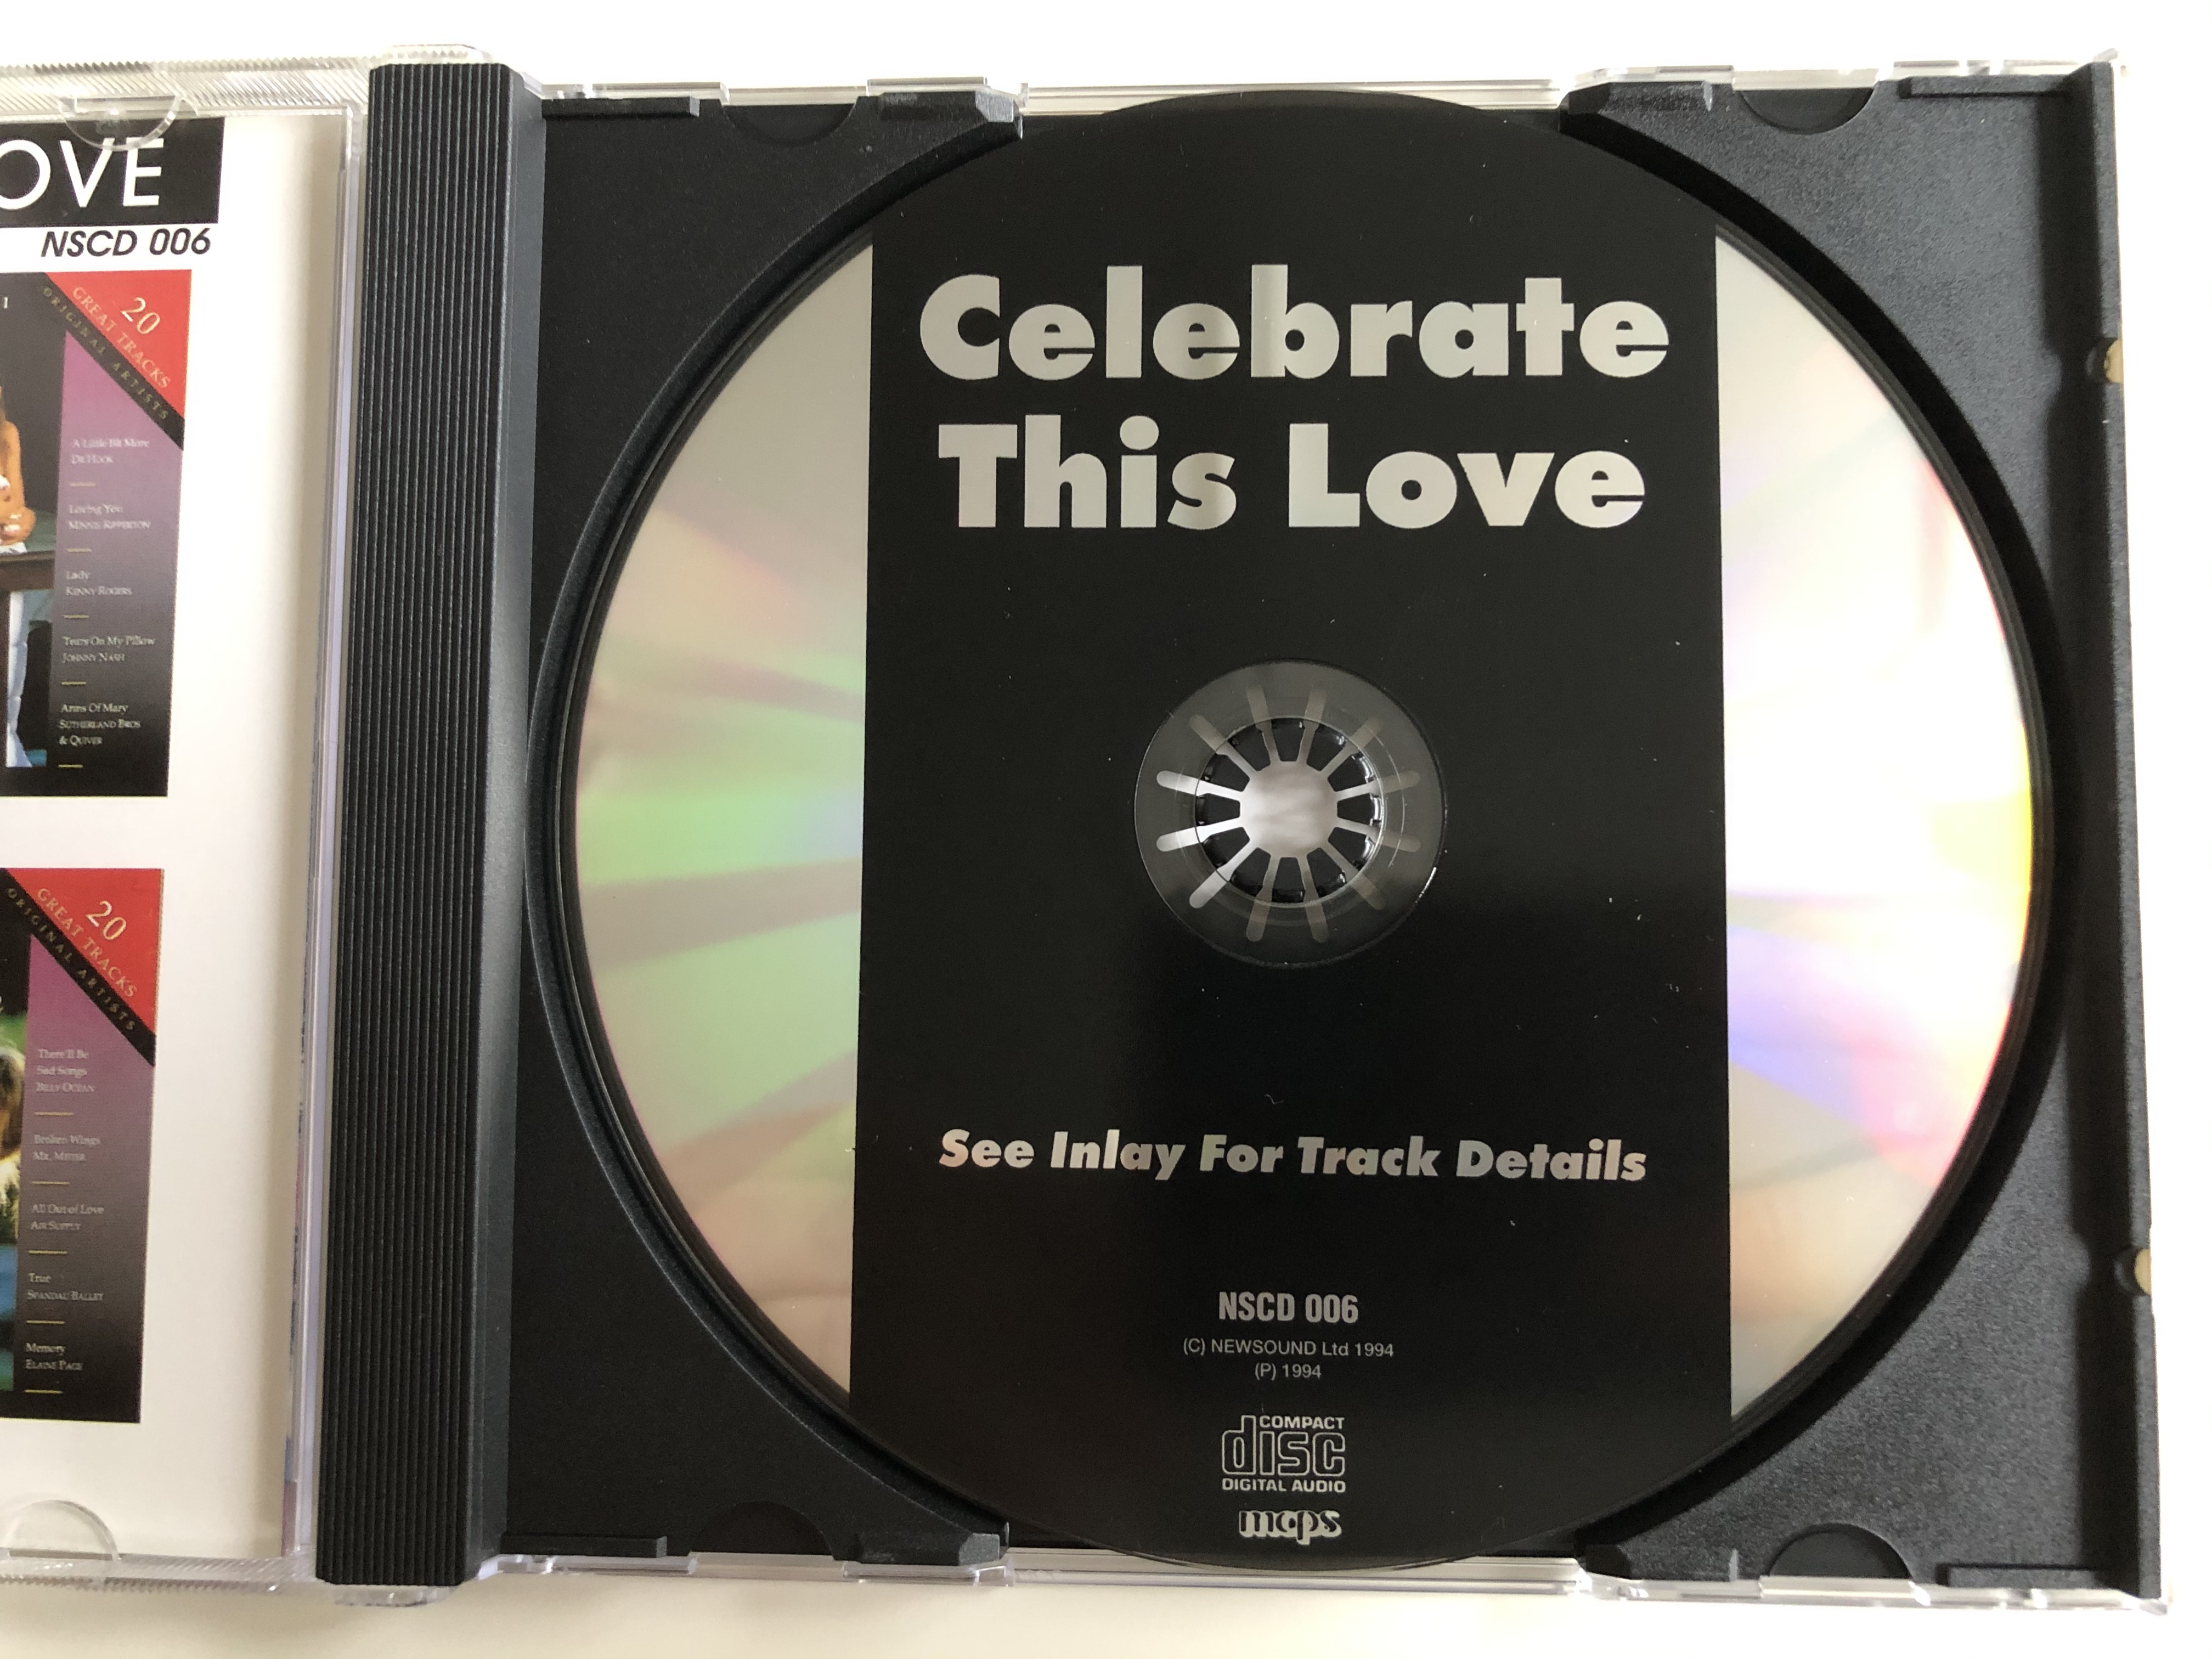 the-love-collection-vol.-4-celebrate-this-love-20-great-tracks-original-artists-there-ll-be-sad-songs-billy-ocean-broken-wings-mr.-mister-all-out-of-love-air-supply-true-spa-3-.jpg